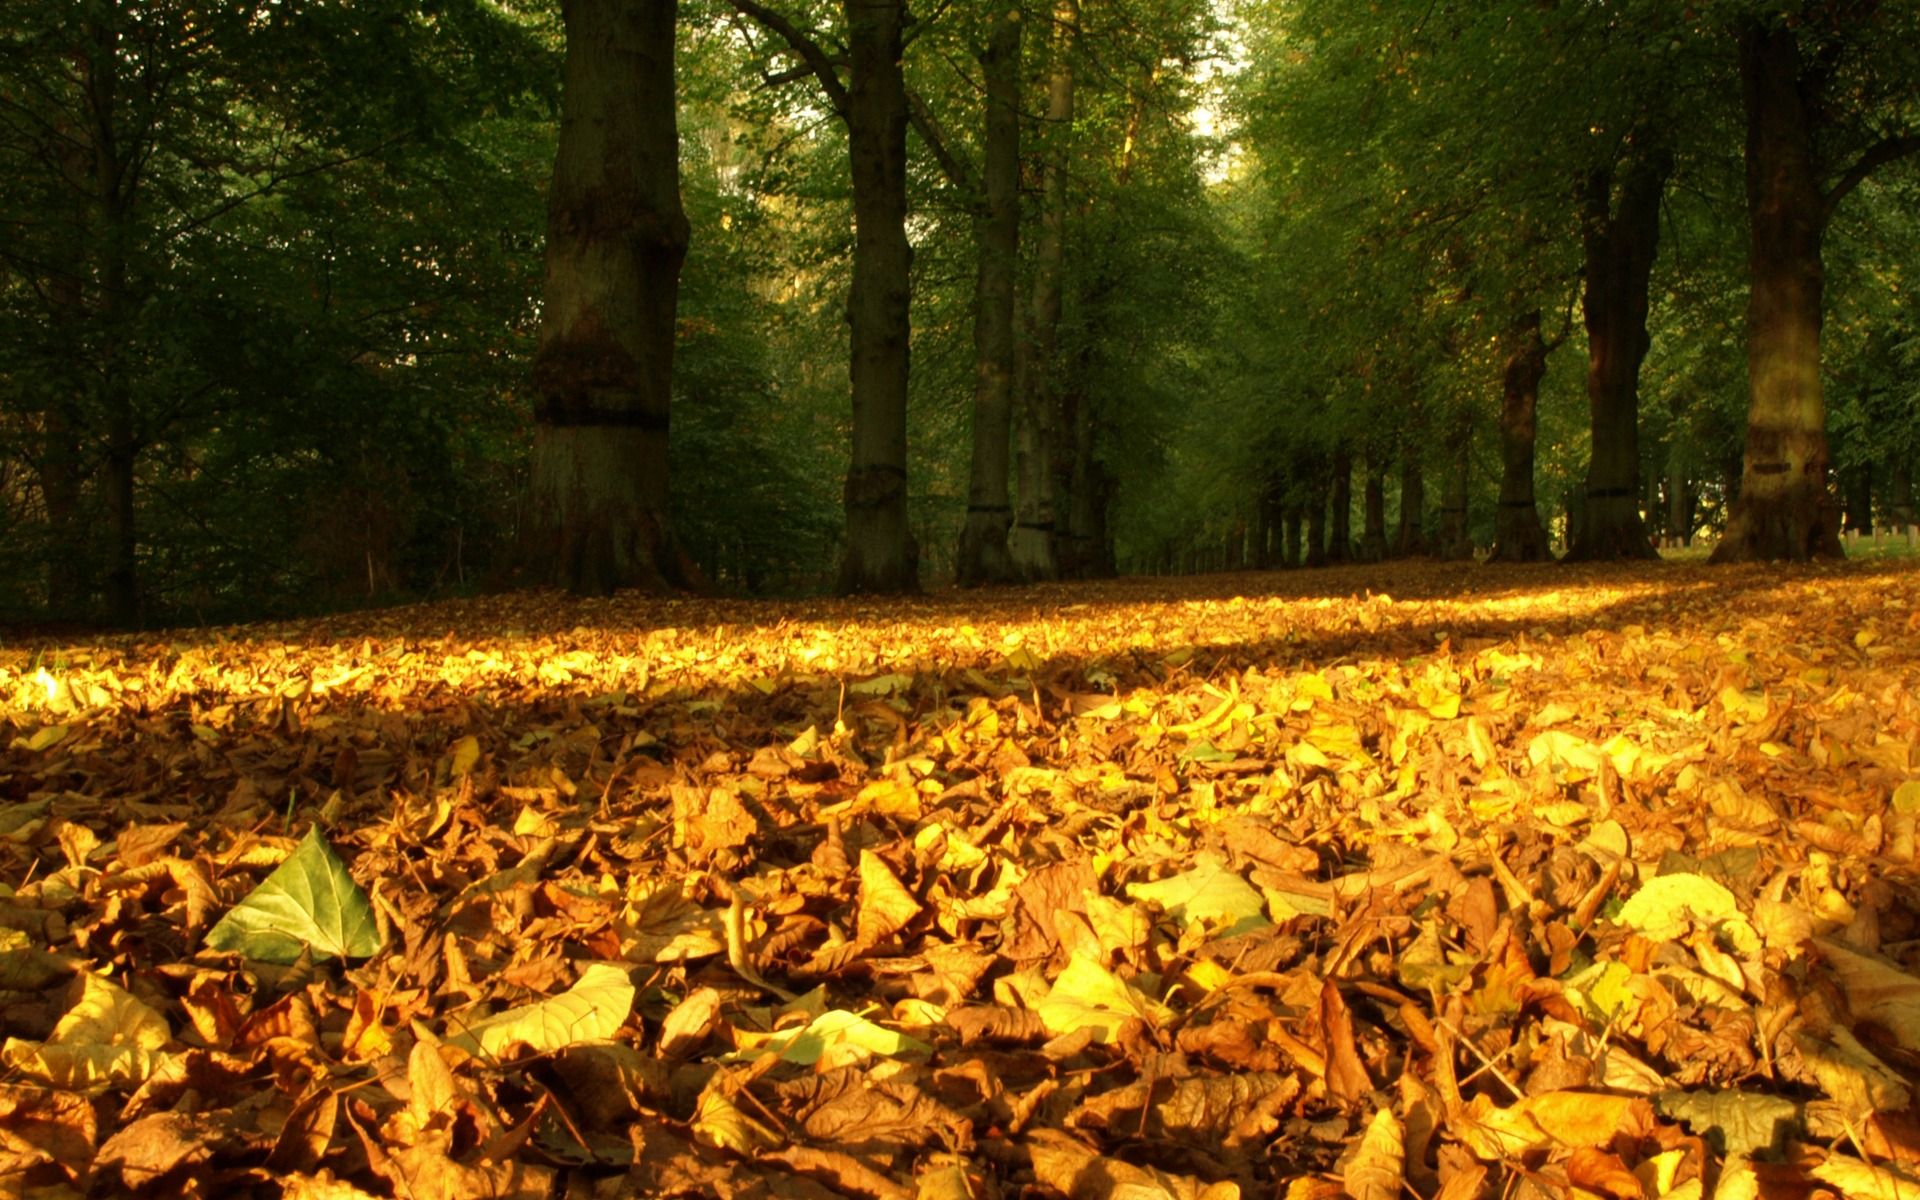 Autumn Leaves Carpet Wallpaper Autumn Nature Wallpaper in jpg format for free download